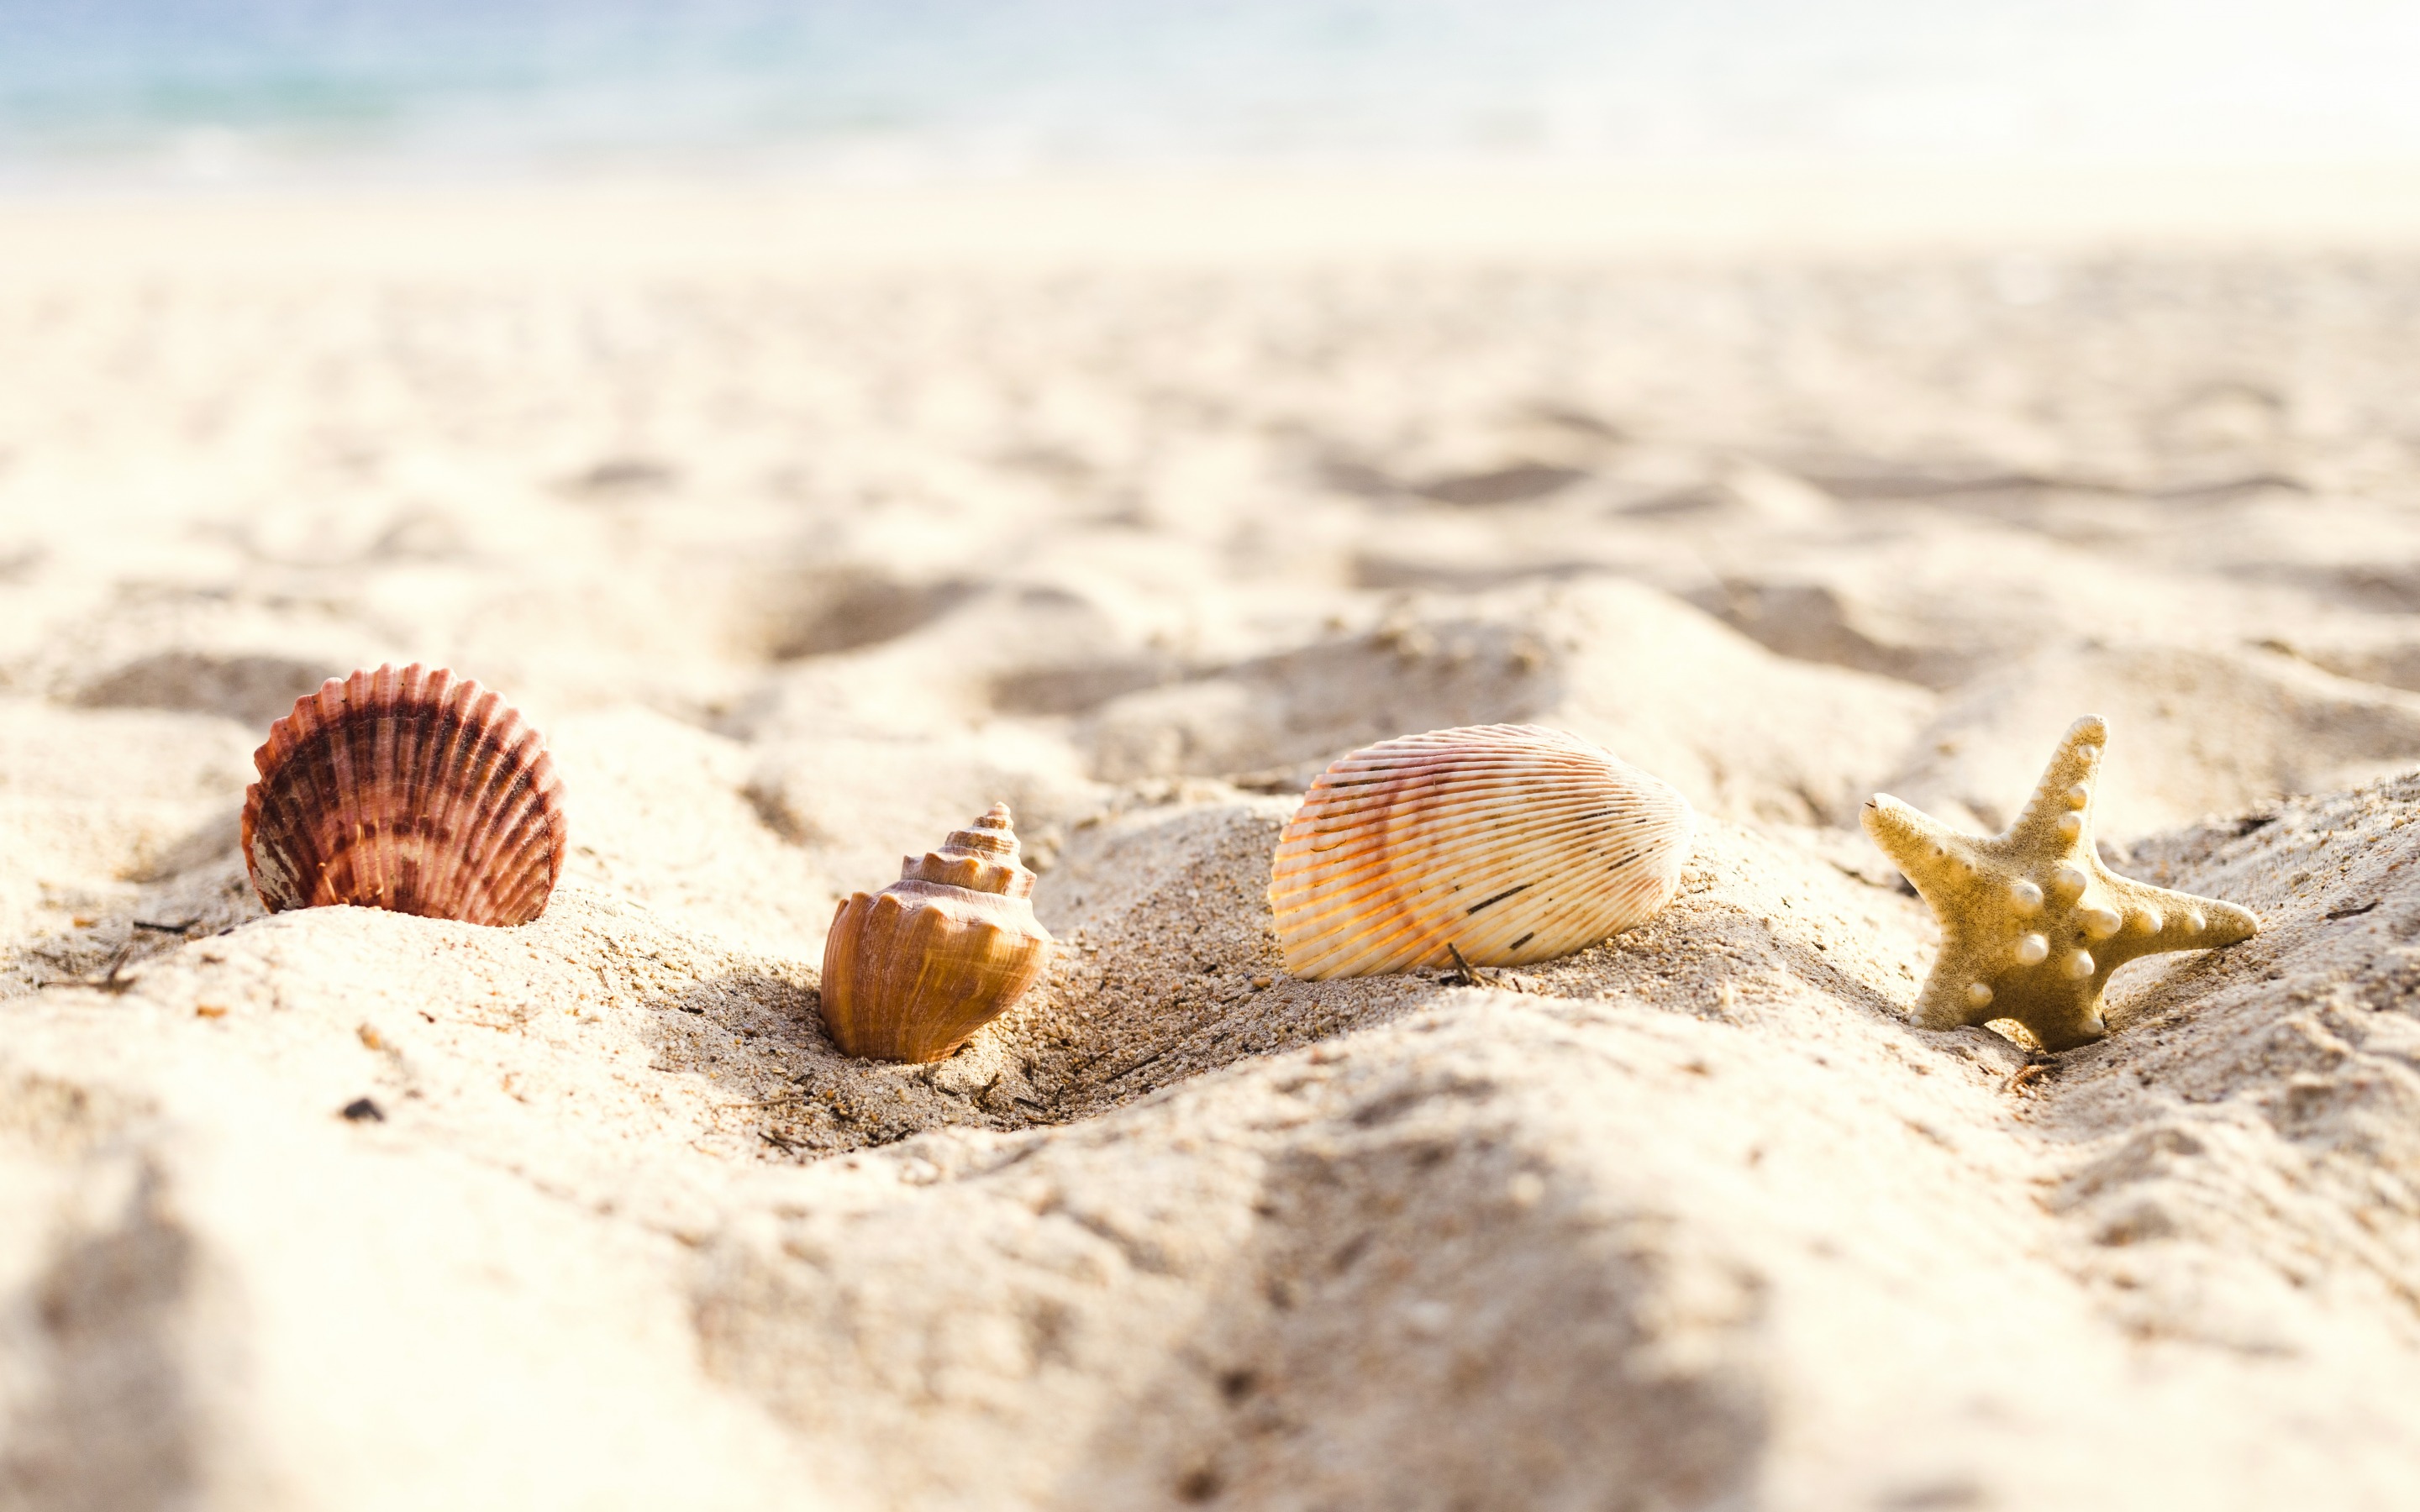 Download wallpaper seashells in the sand, beach, summer, sand, coast, sea, summer travel concepts for desktop with resolution 2880x1800. High Quality HD picture wallpaper